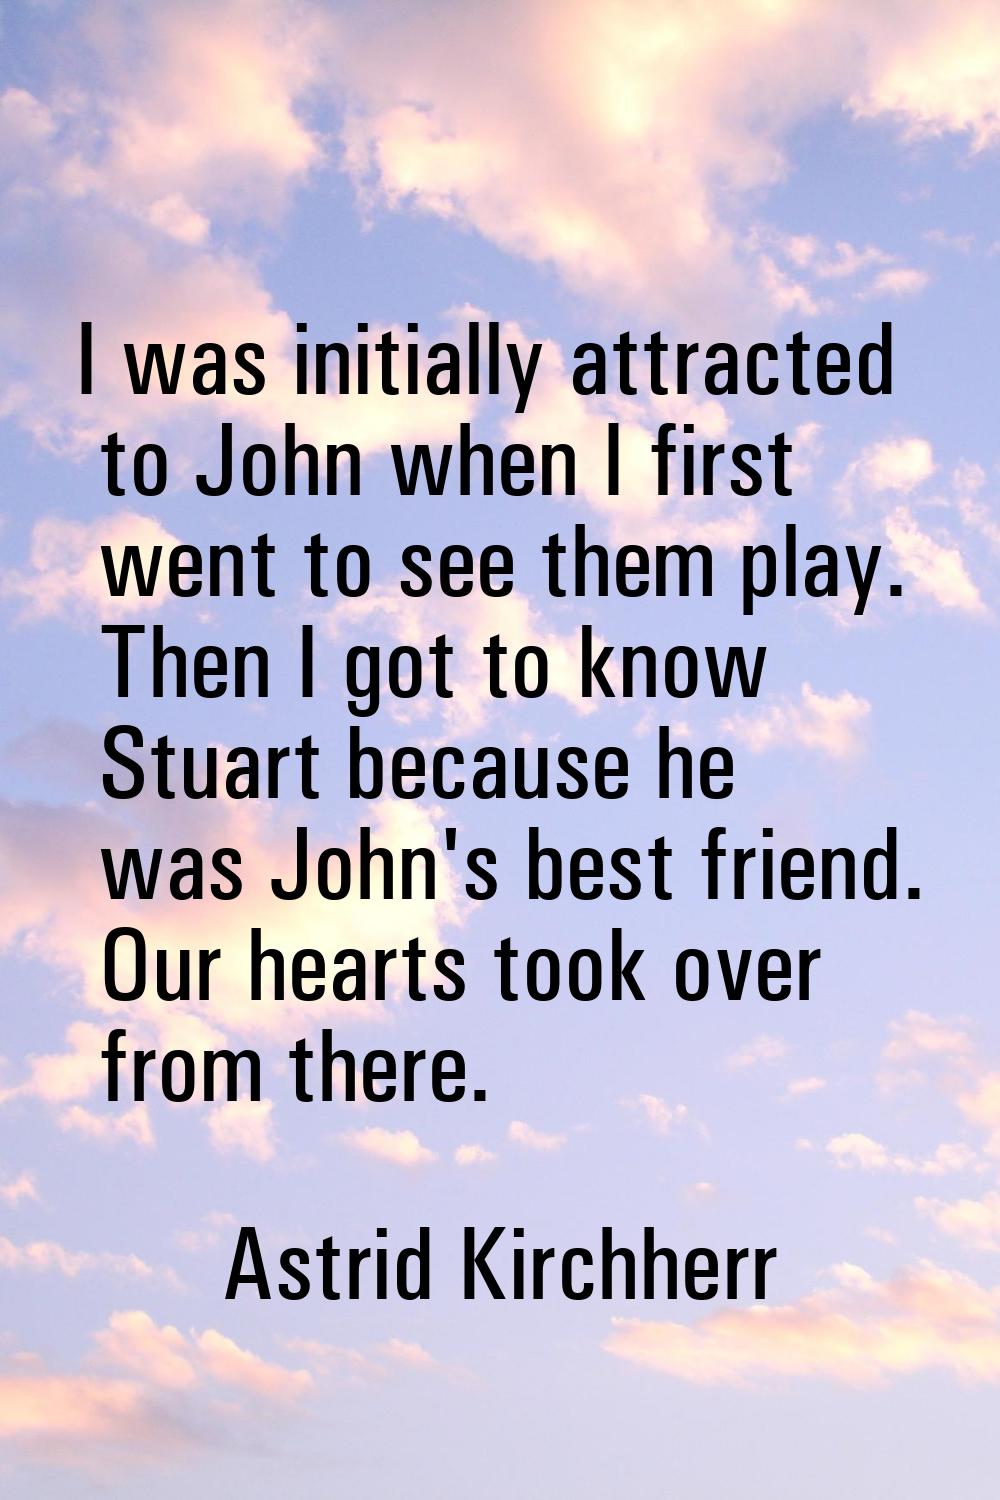 I was initially attracted to John when I first went to see them play. Then I got to know Stuart bec